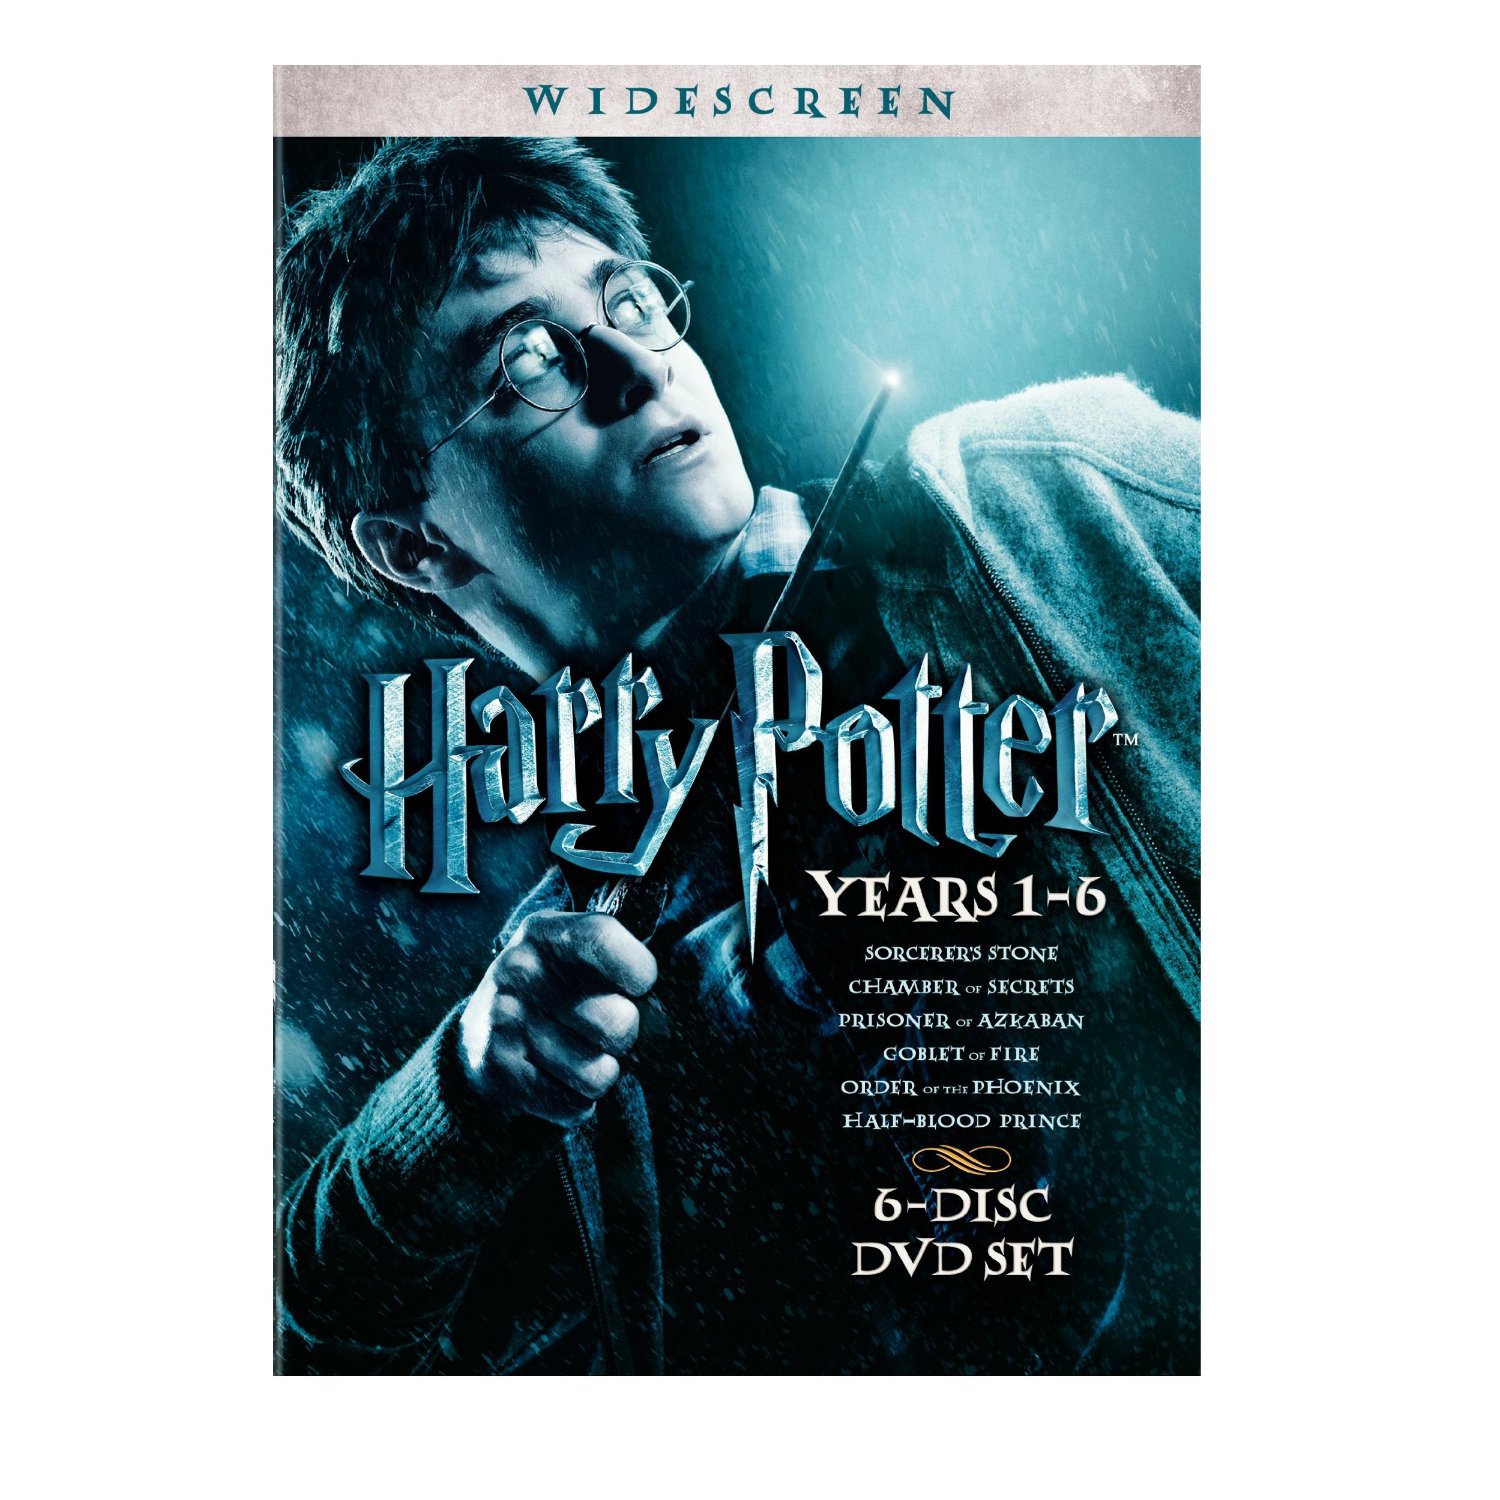 Harry Potter Years 1-6